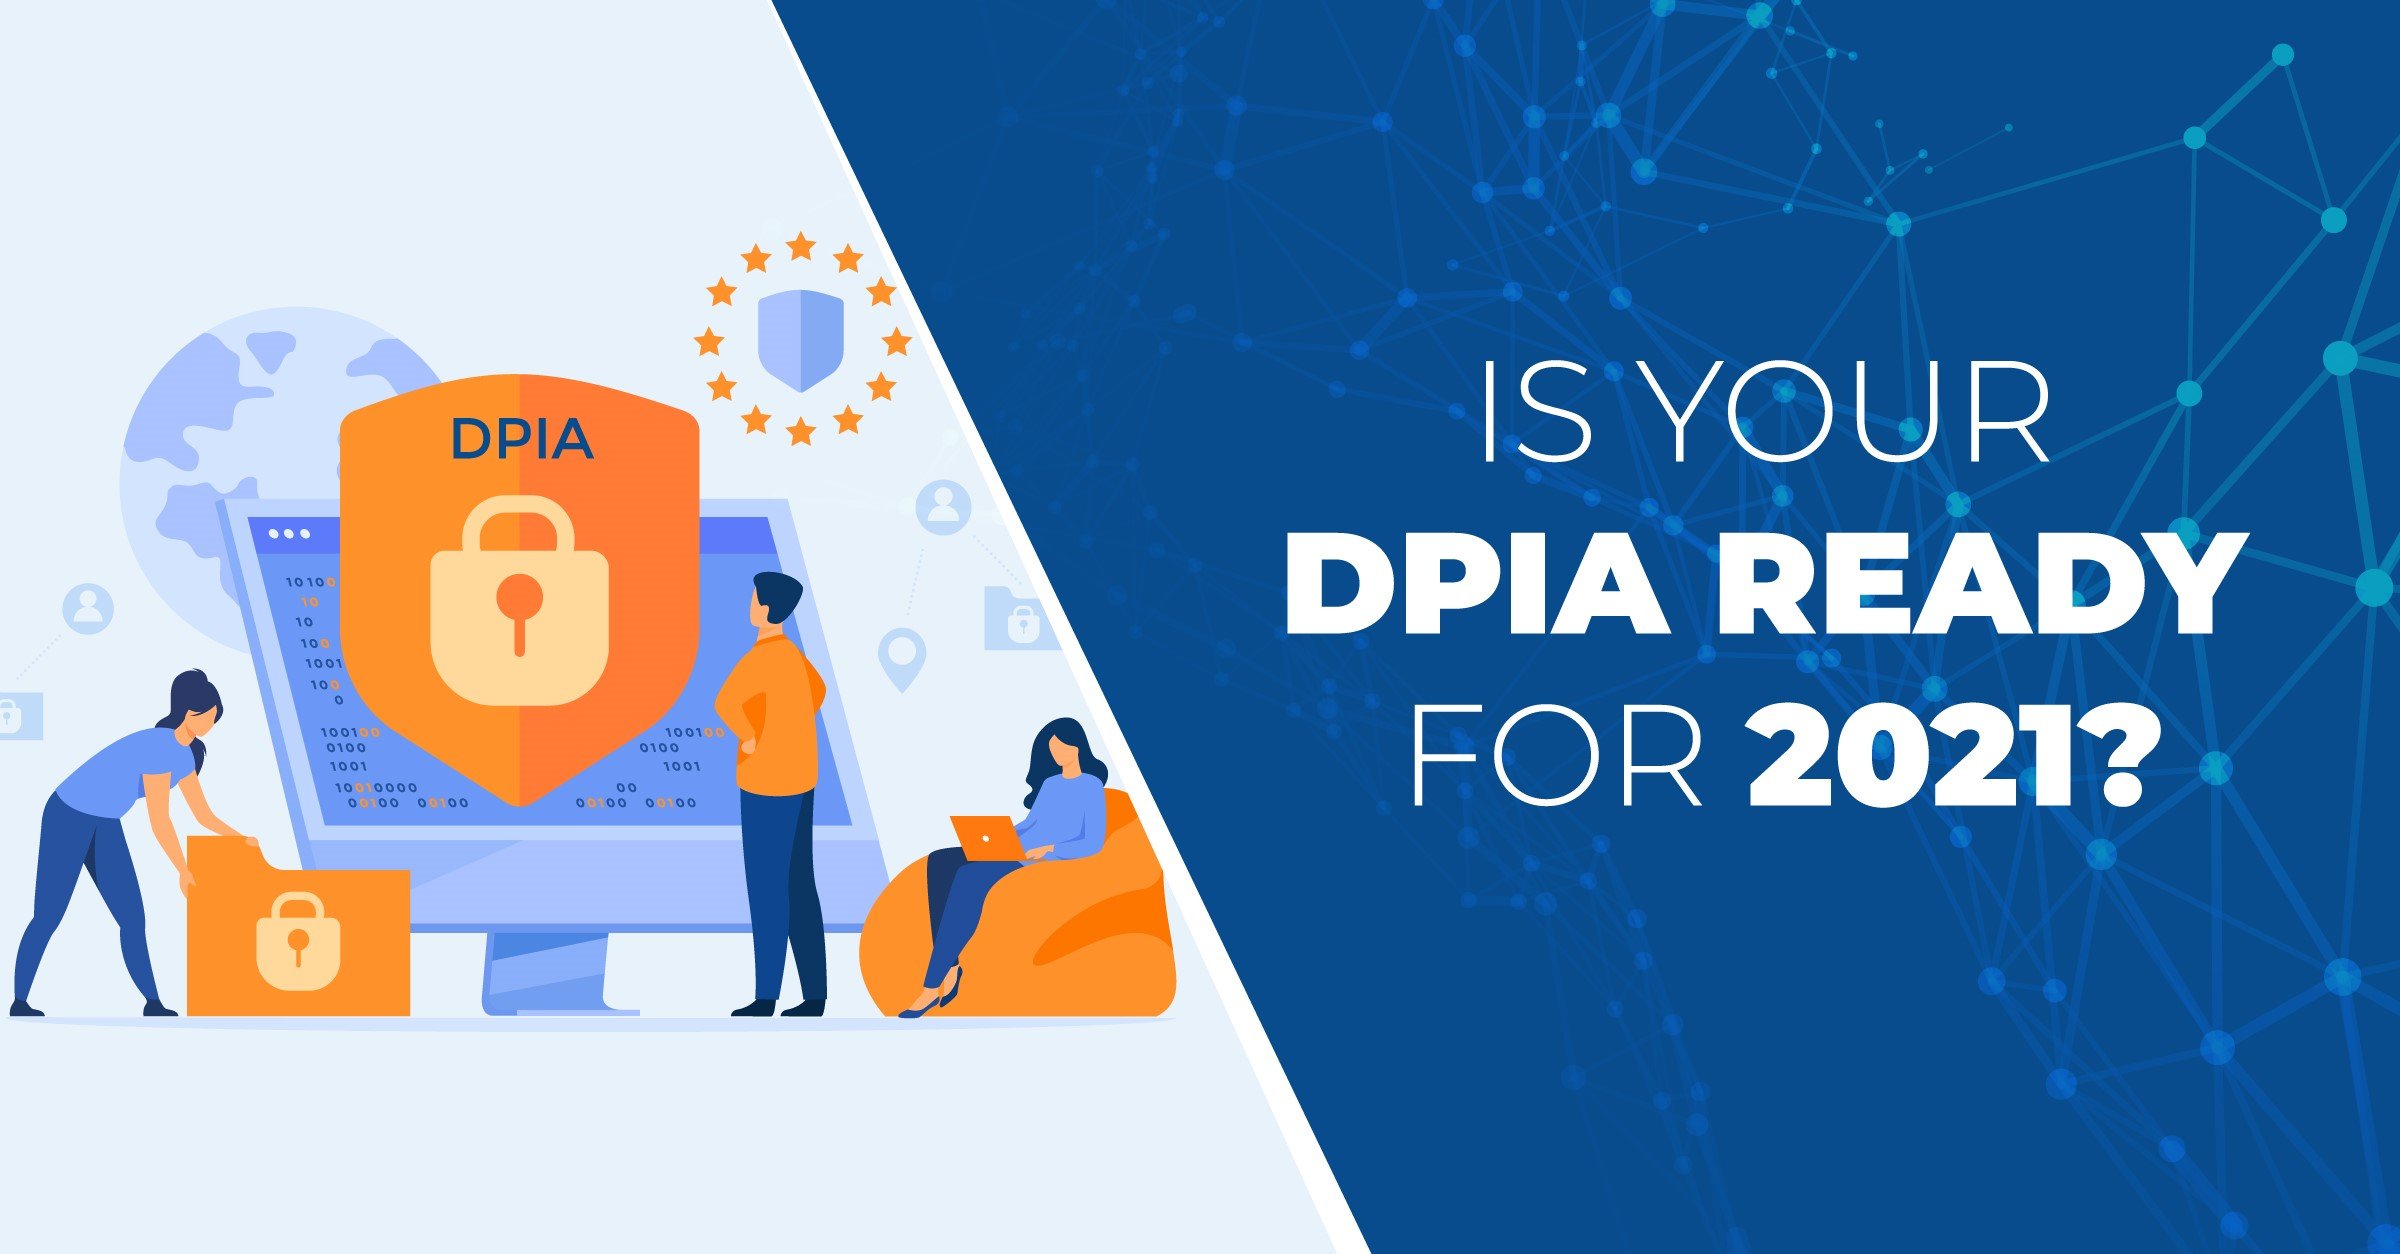 Is your Data Protection Impact Assessment (DPIA) process ready for 2021?